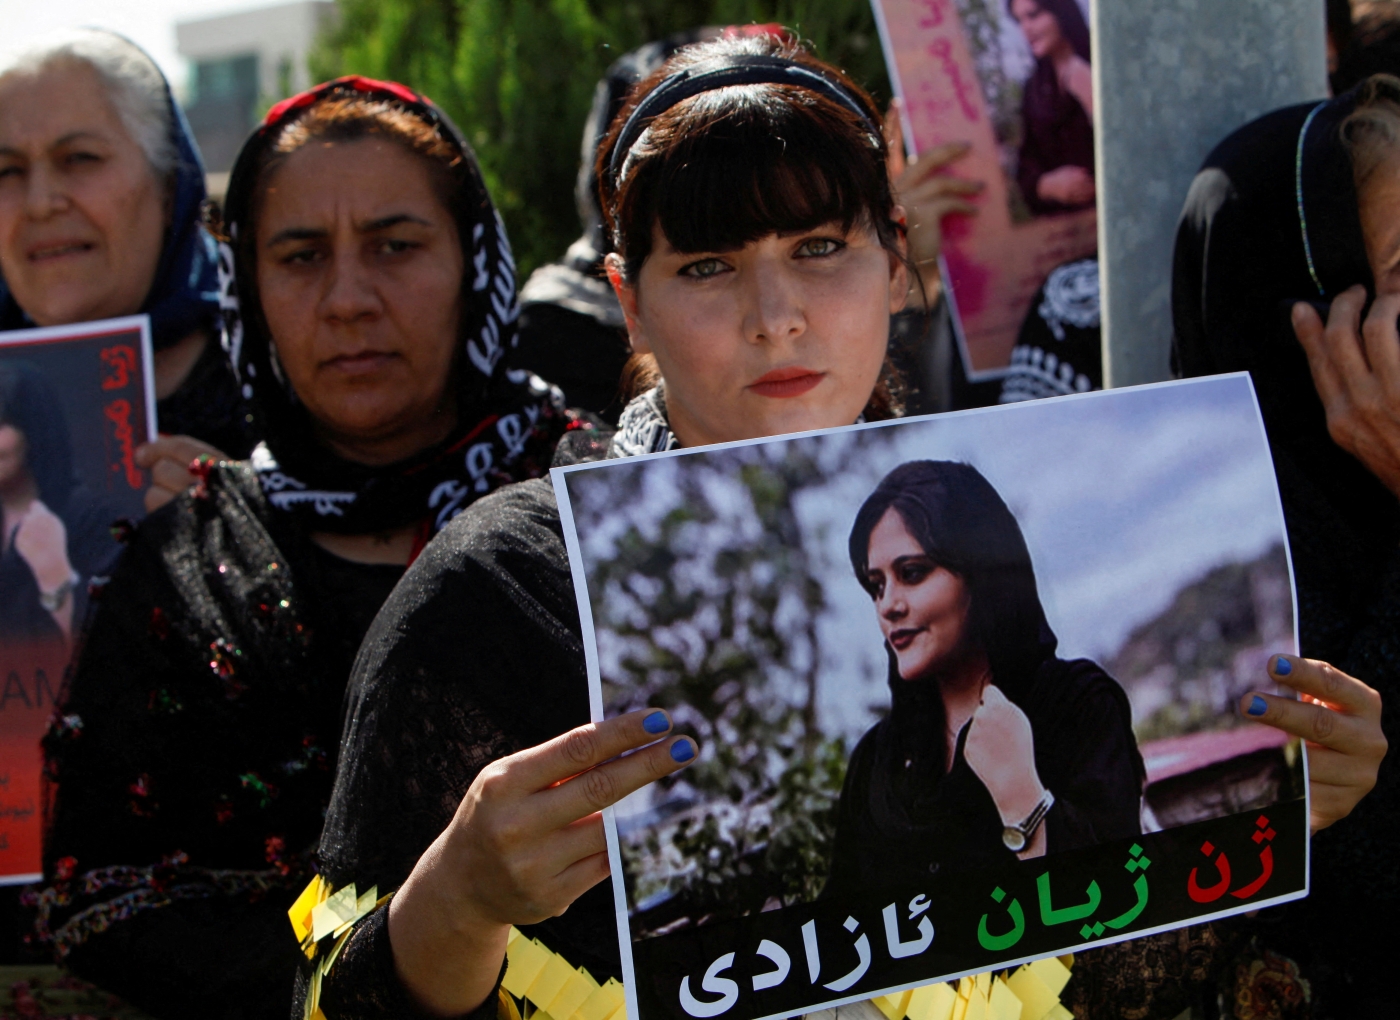 A woman holds a placard during a protest following the death of Mahsa Amini in front of the United Nations headquarters in Erbil, Iraq on 24 September 2022 (Reuters)